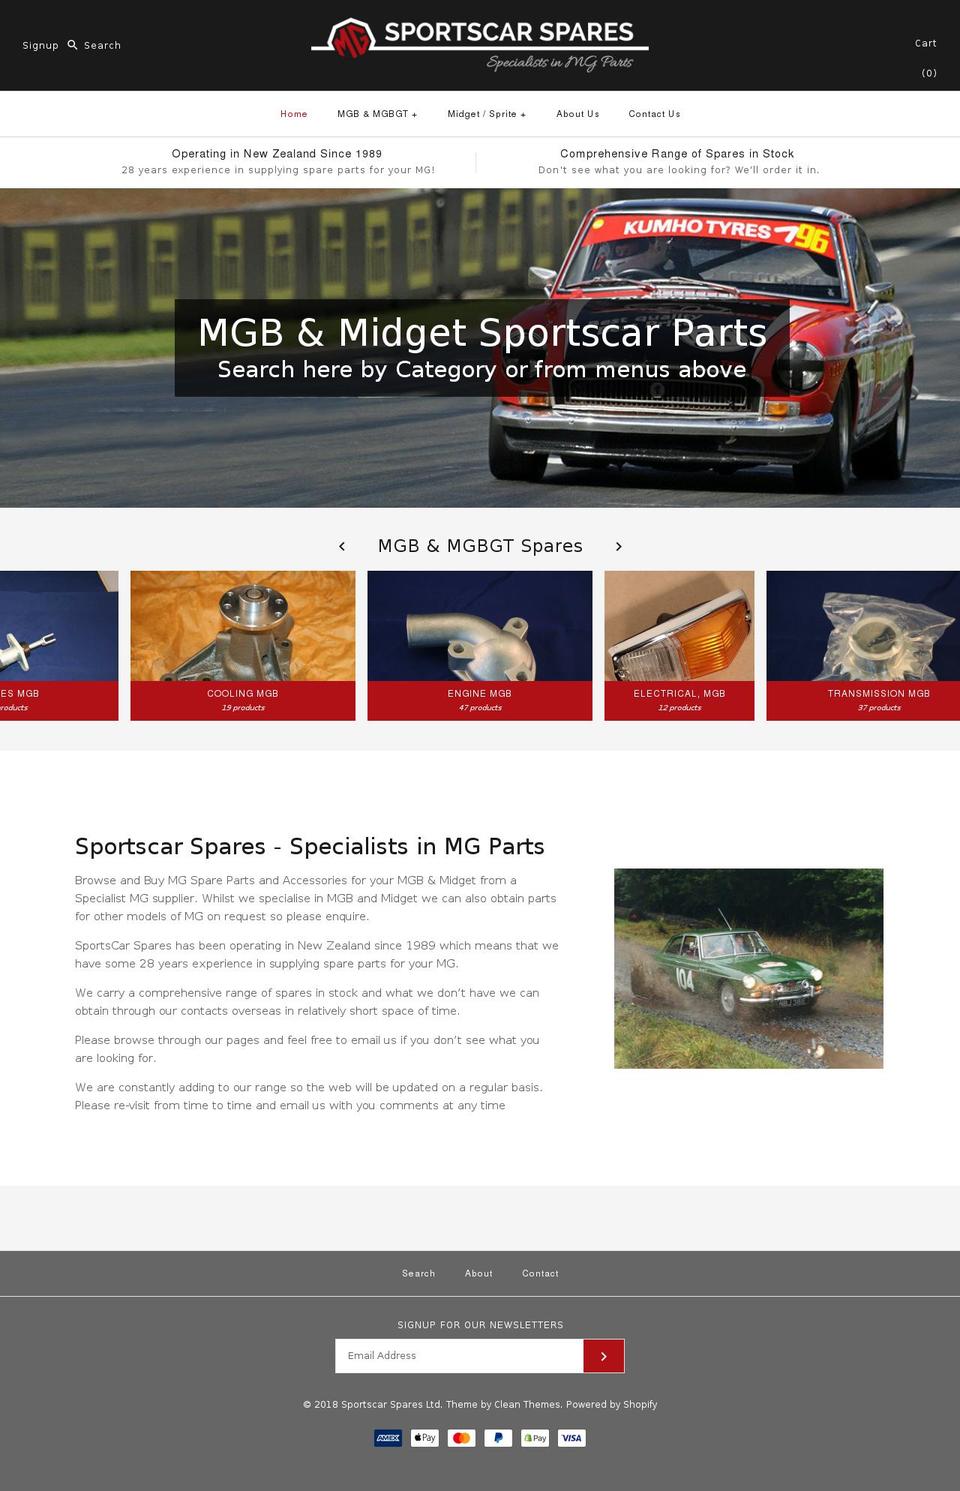 Sports Shopify theme site example sportscarspares.co.nz